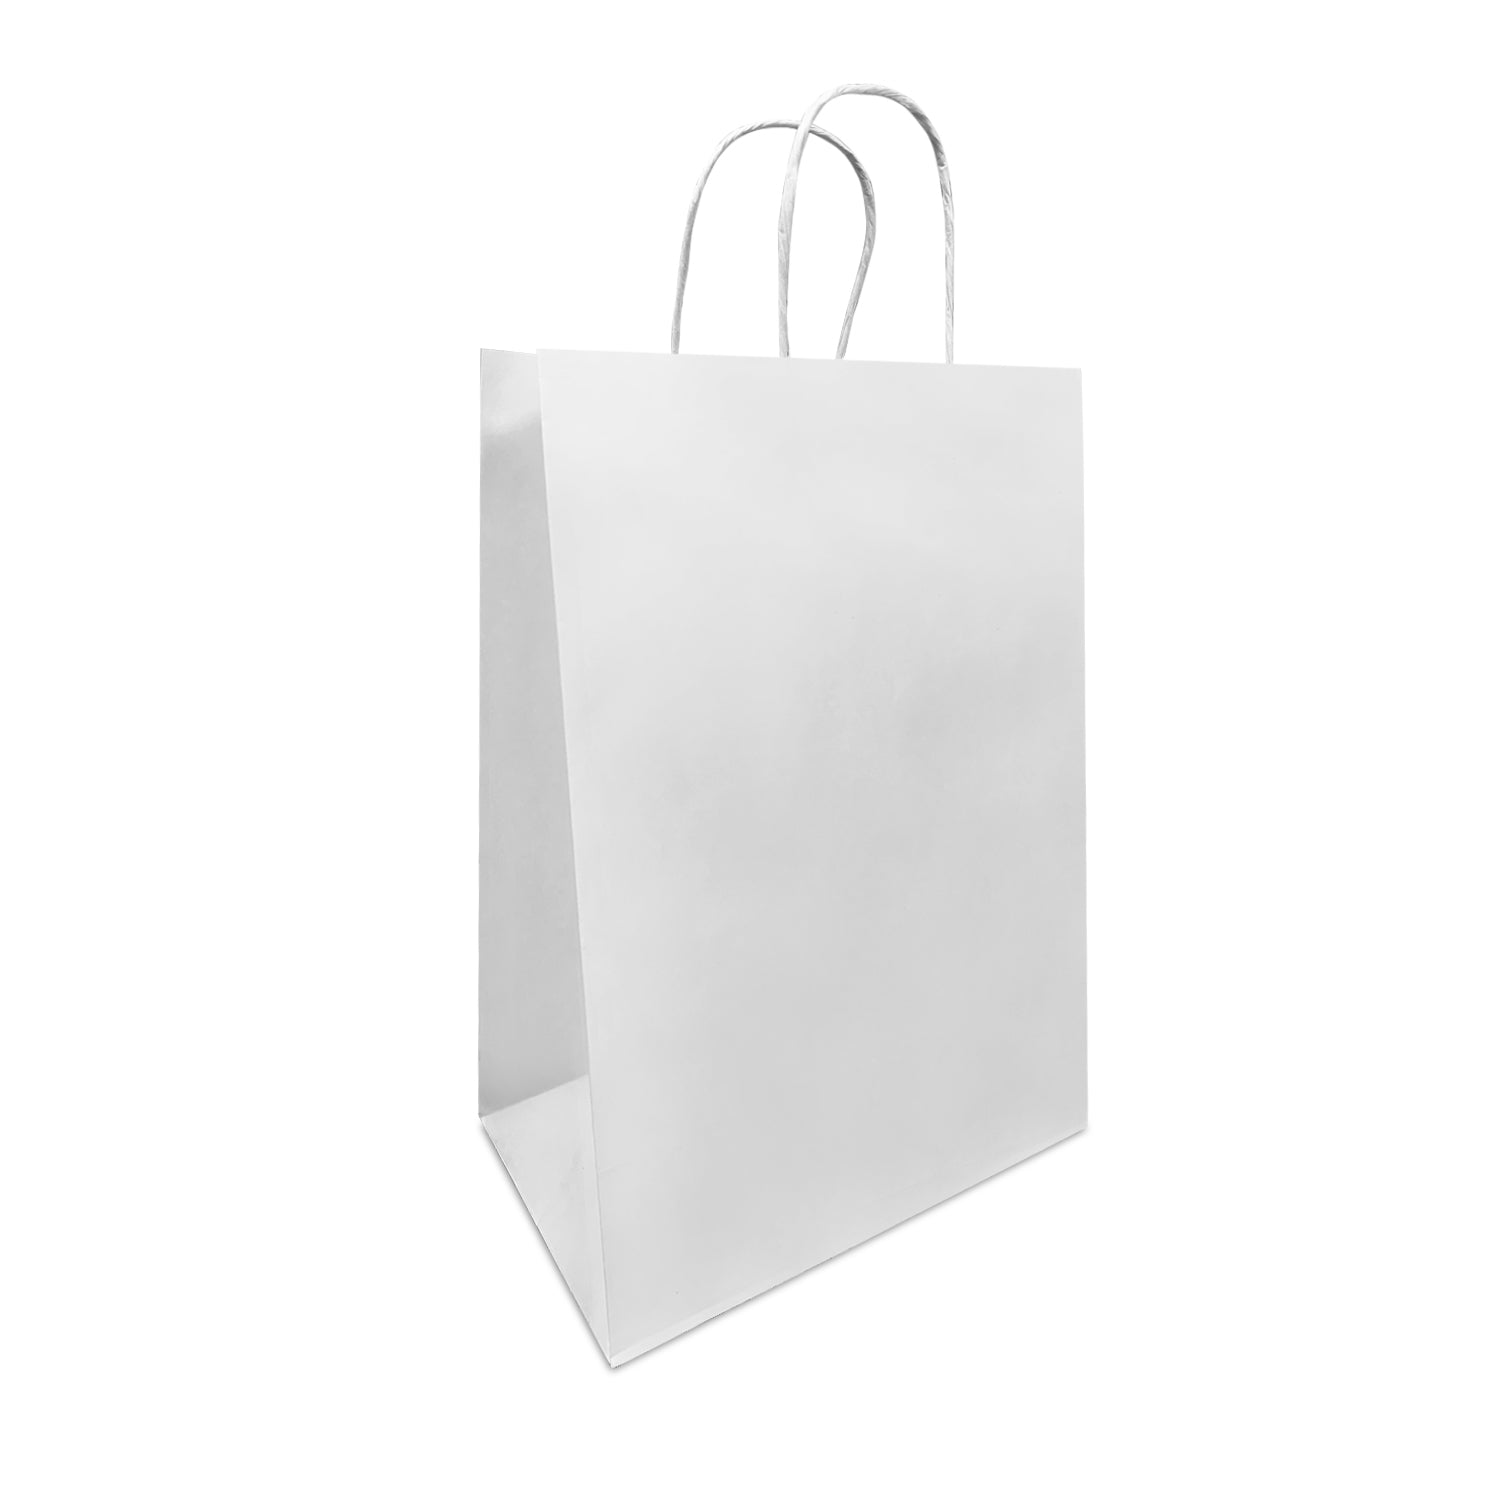 200 Pcs, Double Wine, 9x5.75x13.5 inches, White Kraft Paper Bags, with Twisted Handle